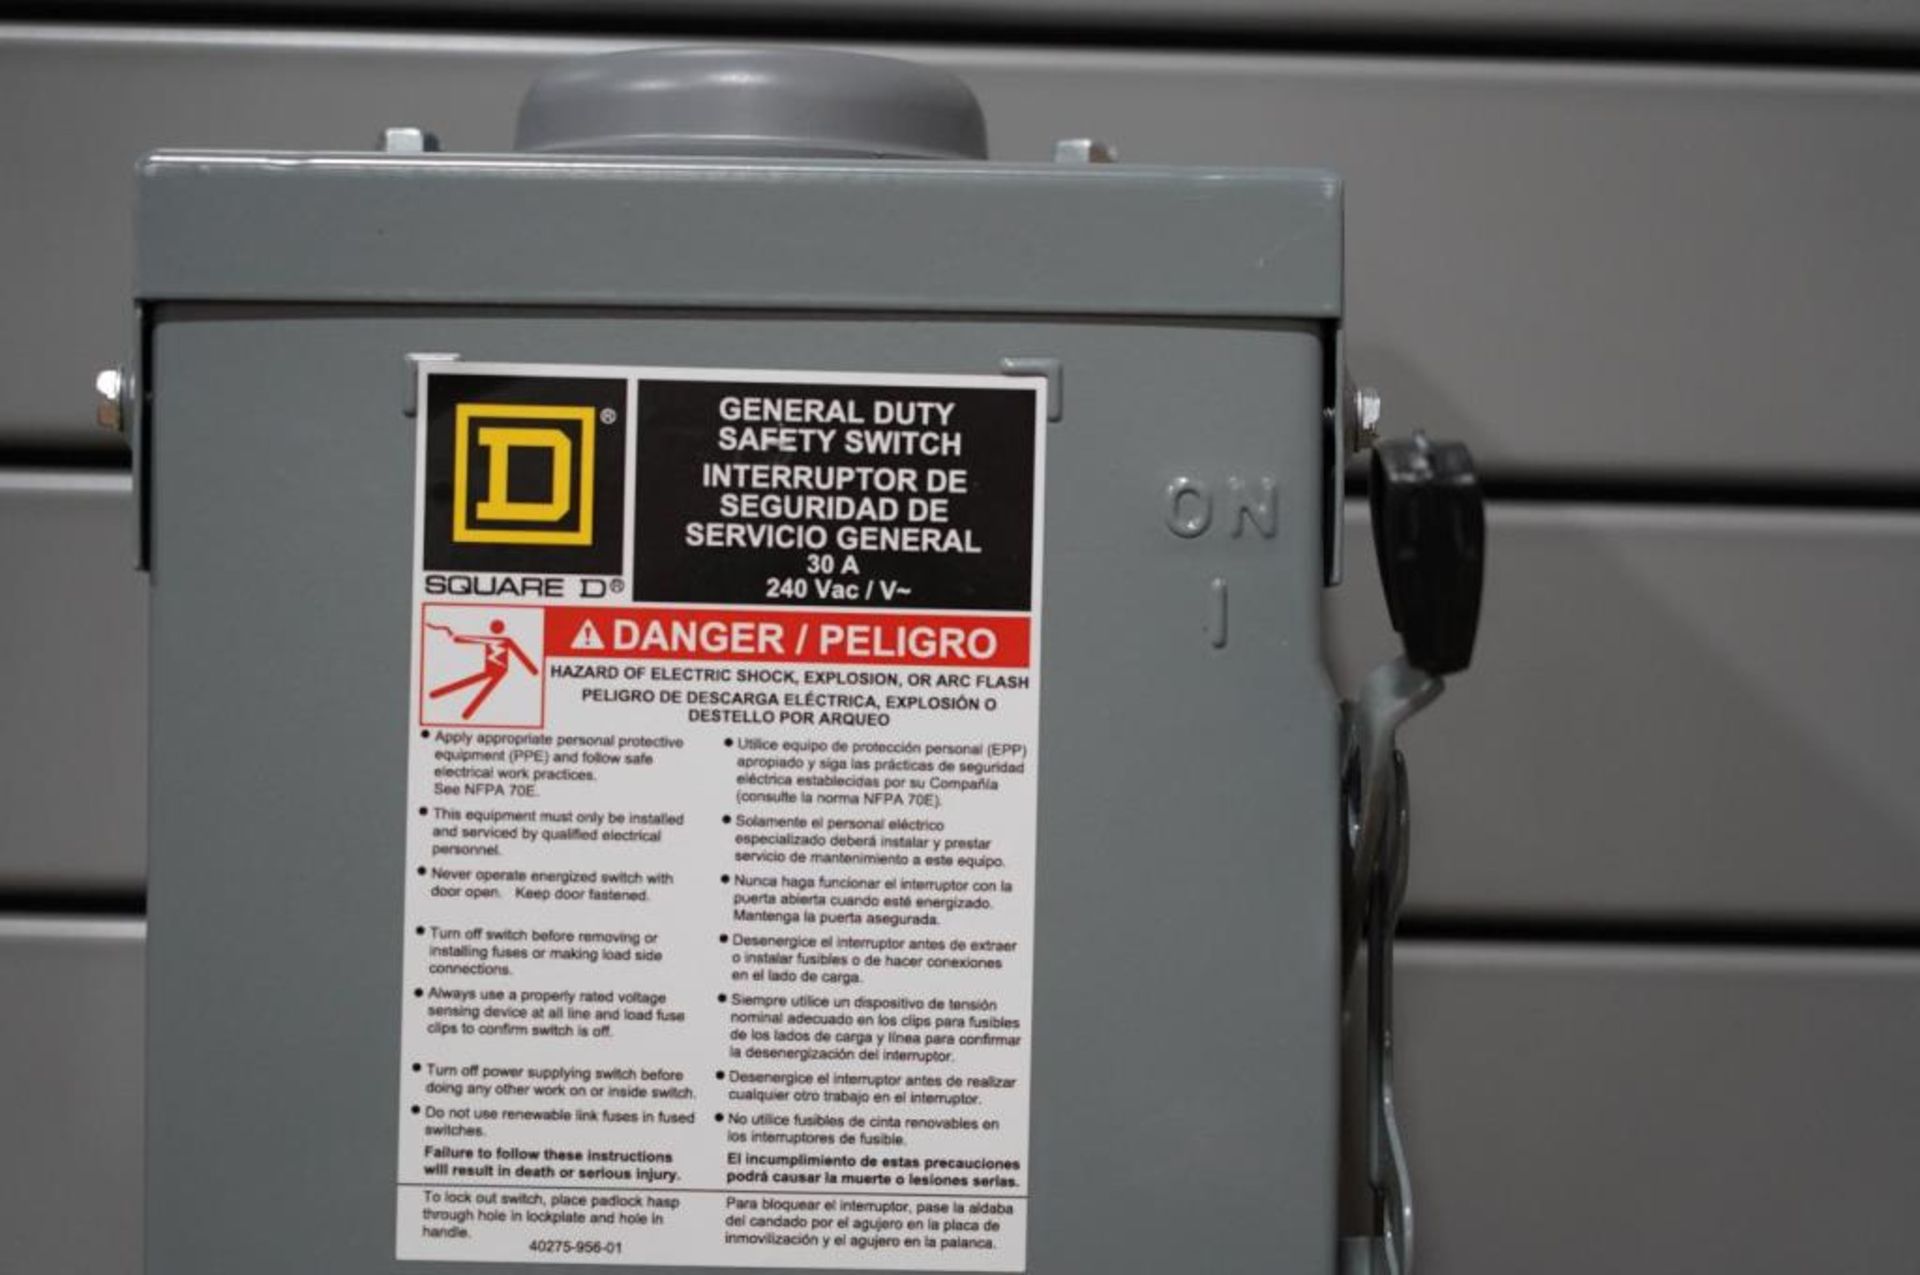 Eaton / Square D 30 Amp General Duty Safety - Image 3 of 5